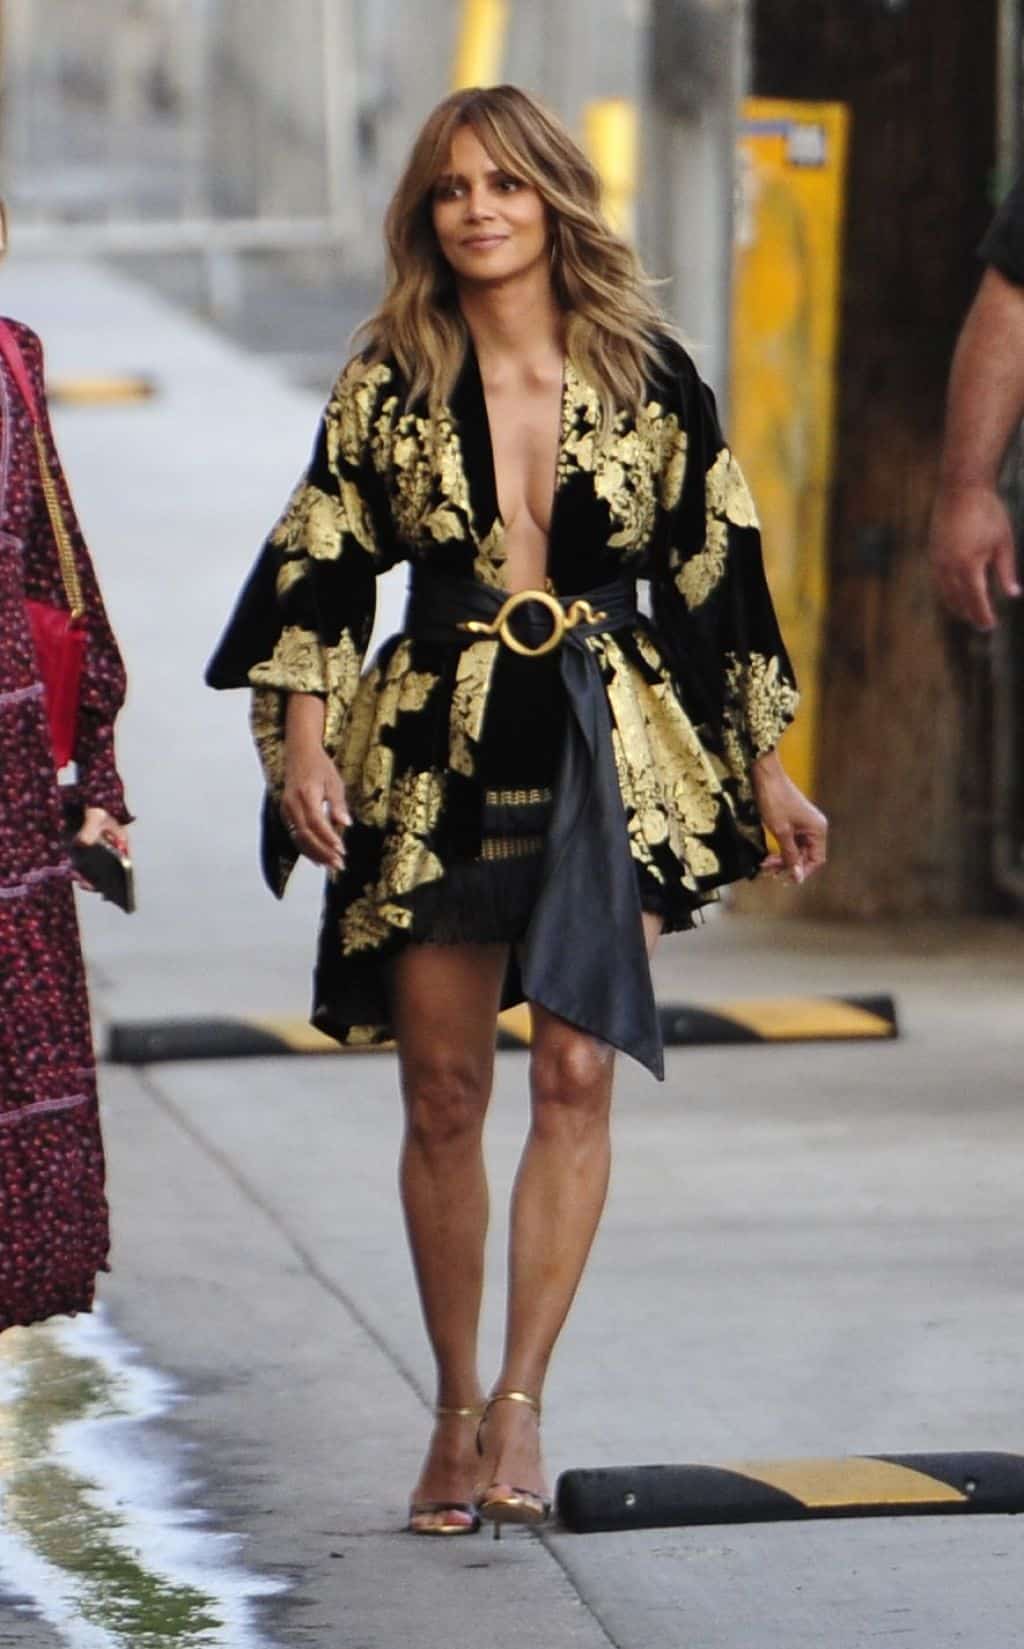 Halle Berry Looks Incredible in Caftan Mini Dress at Jimmy Kimmel Live